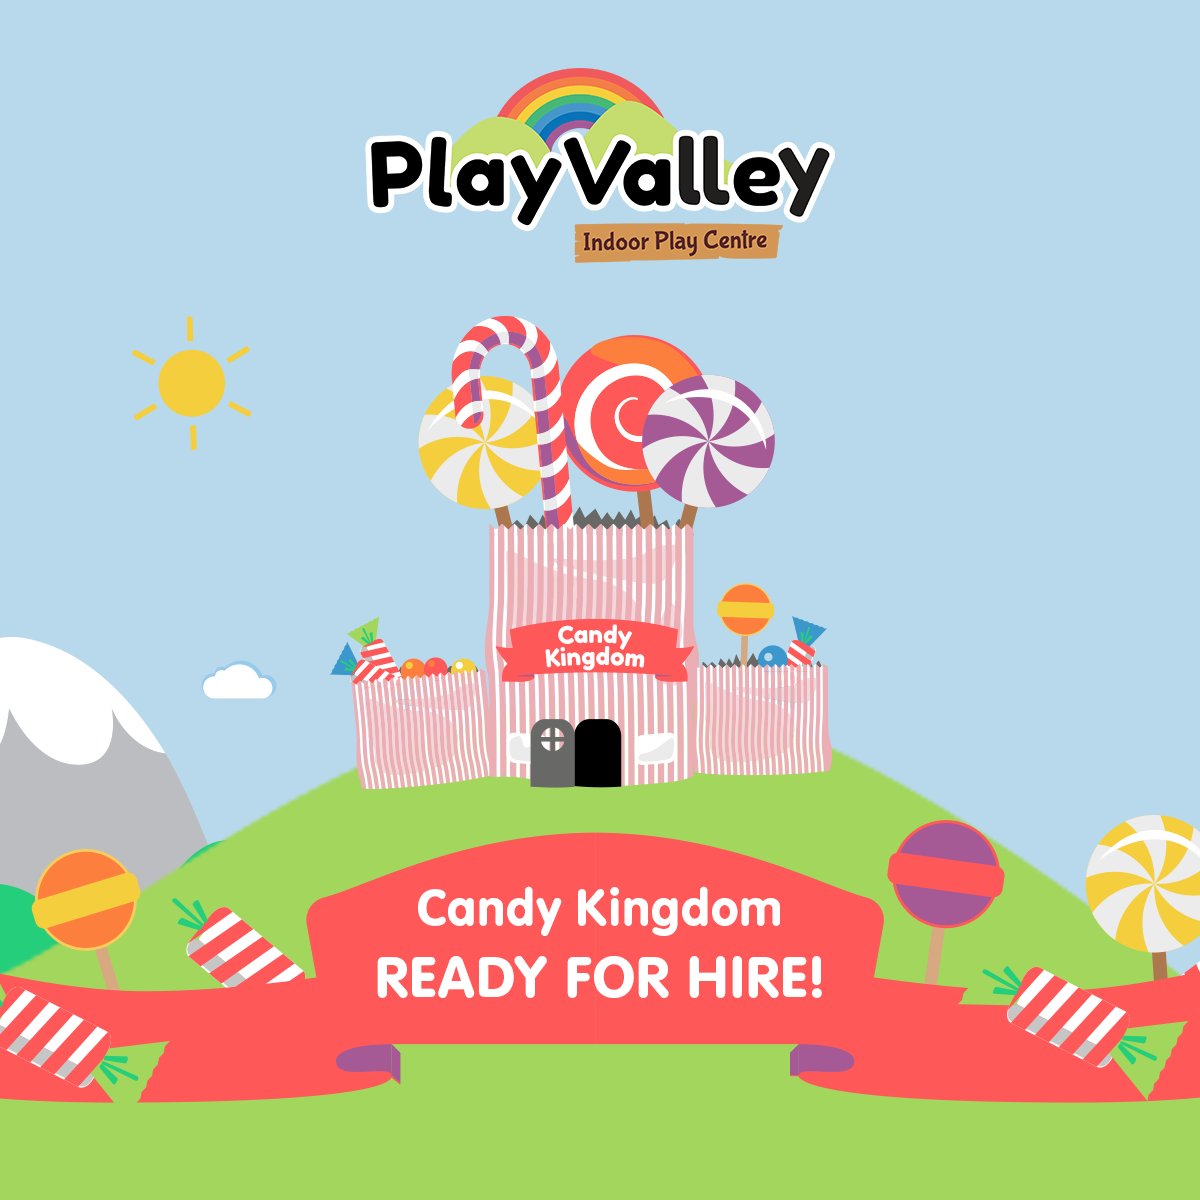 Play Valley Make Your Little One S Day Perfect With Full Decorations Disco Lights And More Book The Candy Kingdom Today T Co Uhispx8ikv T Co 5an03lsya6 Twitter